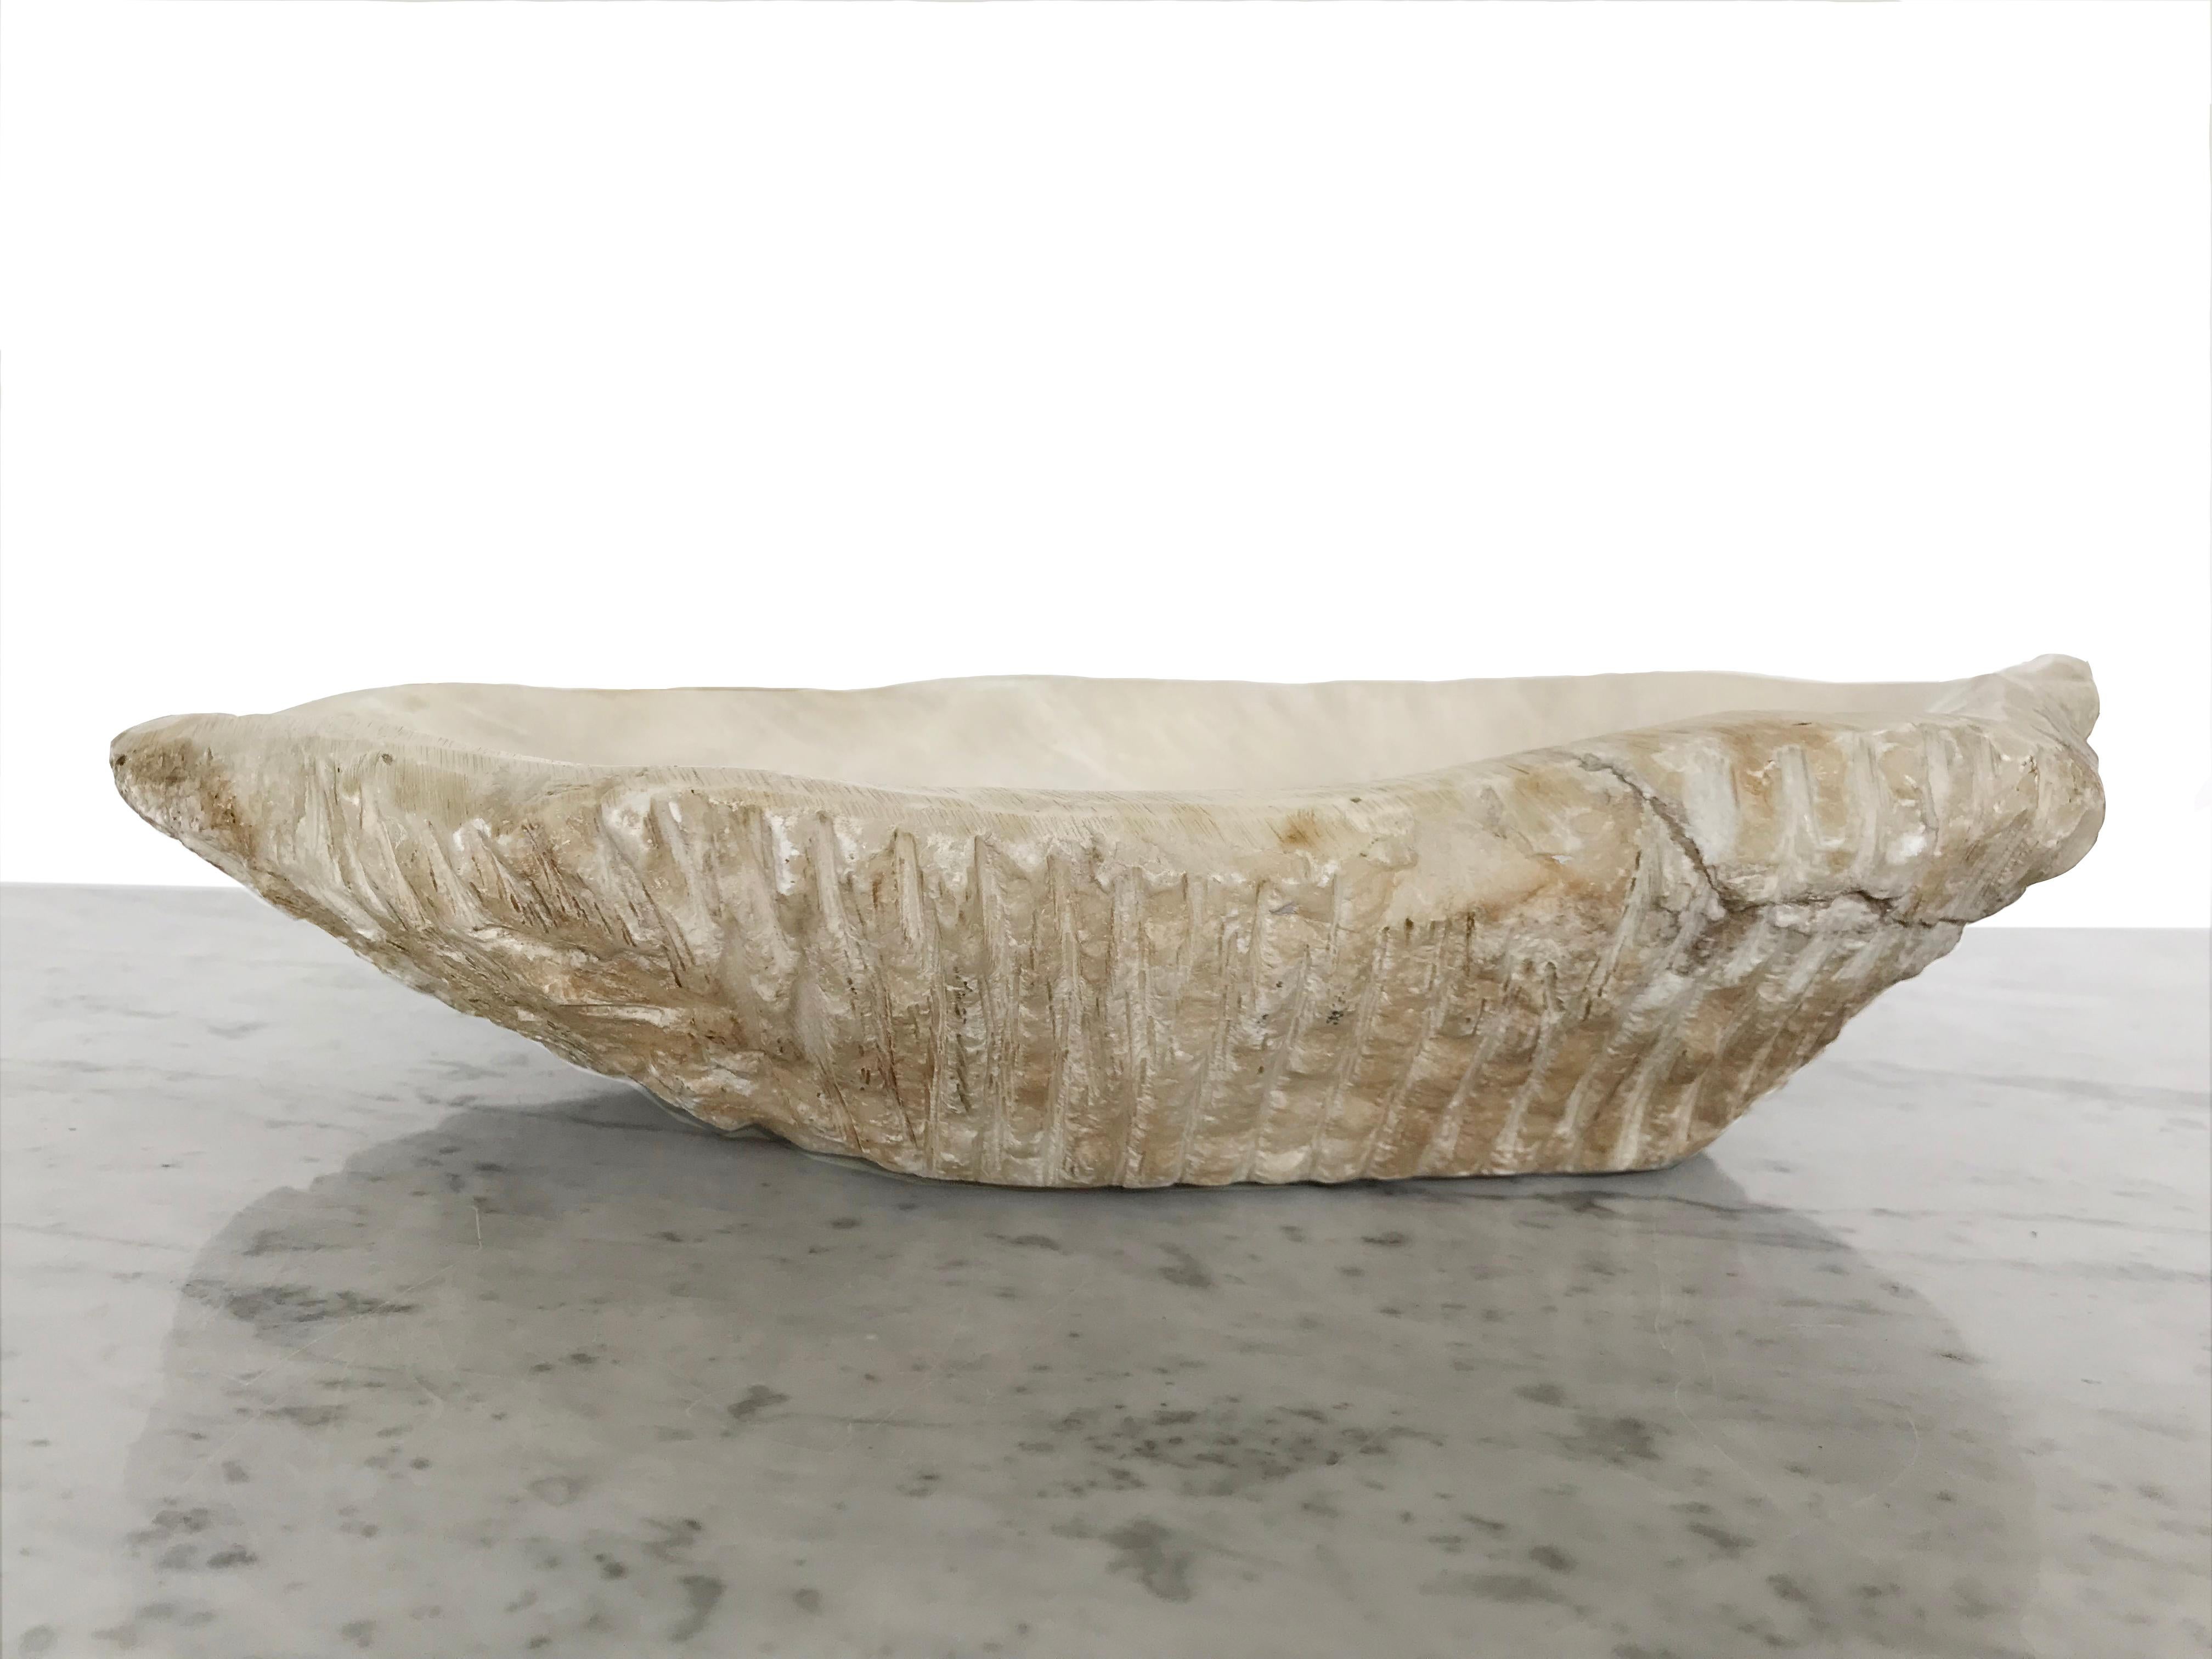 Hand-Carved CAEN STONE DISH - hand worked shallow dish